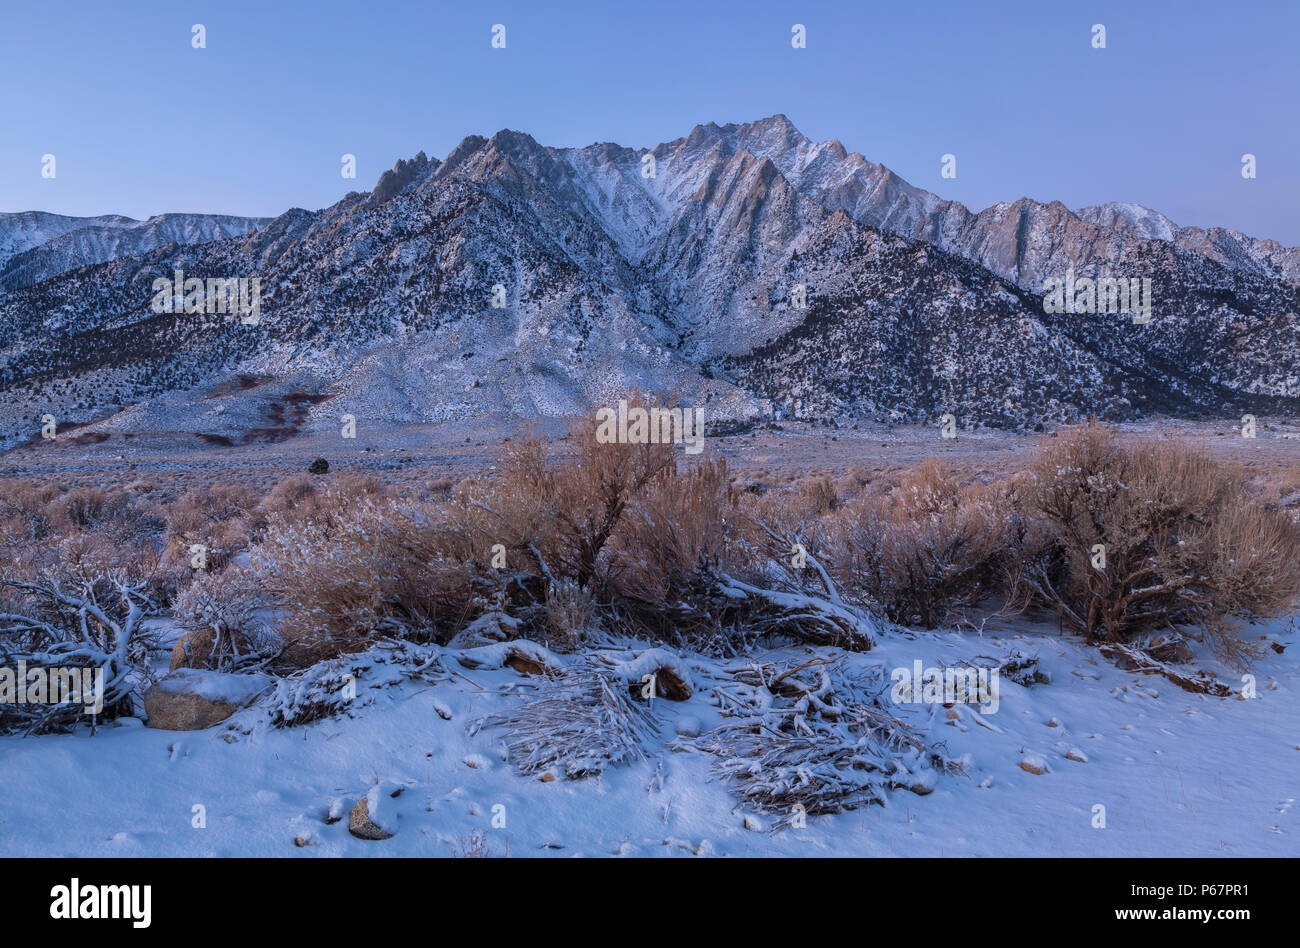 Fresh new snow covered the landscape at Alabama Hill and the Lone Pine Peak in late November, Lone Pine, California, United States. Stock Photo